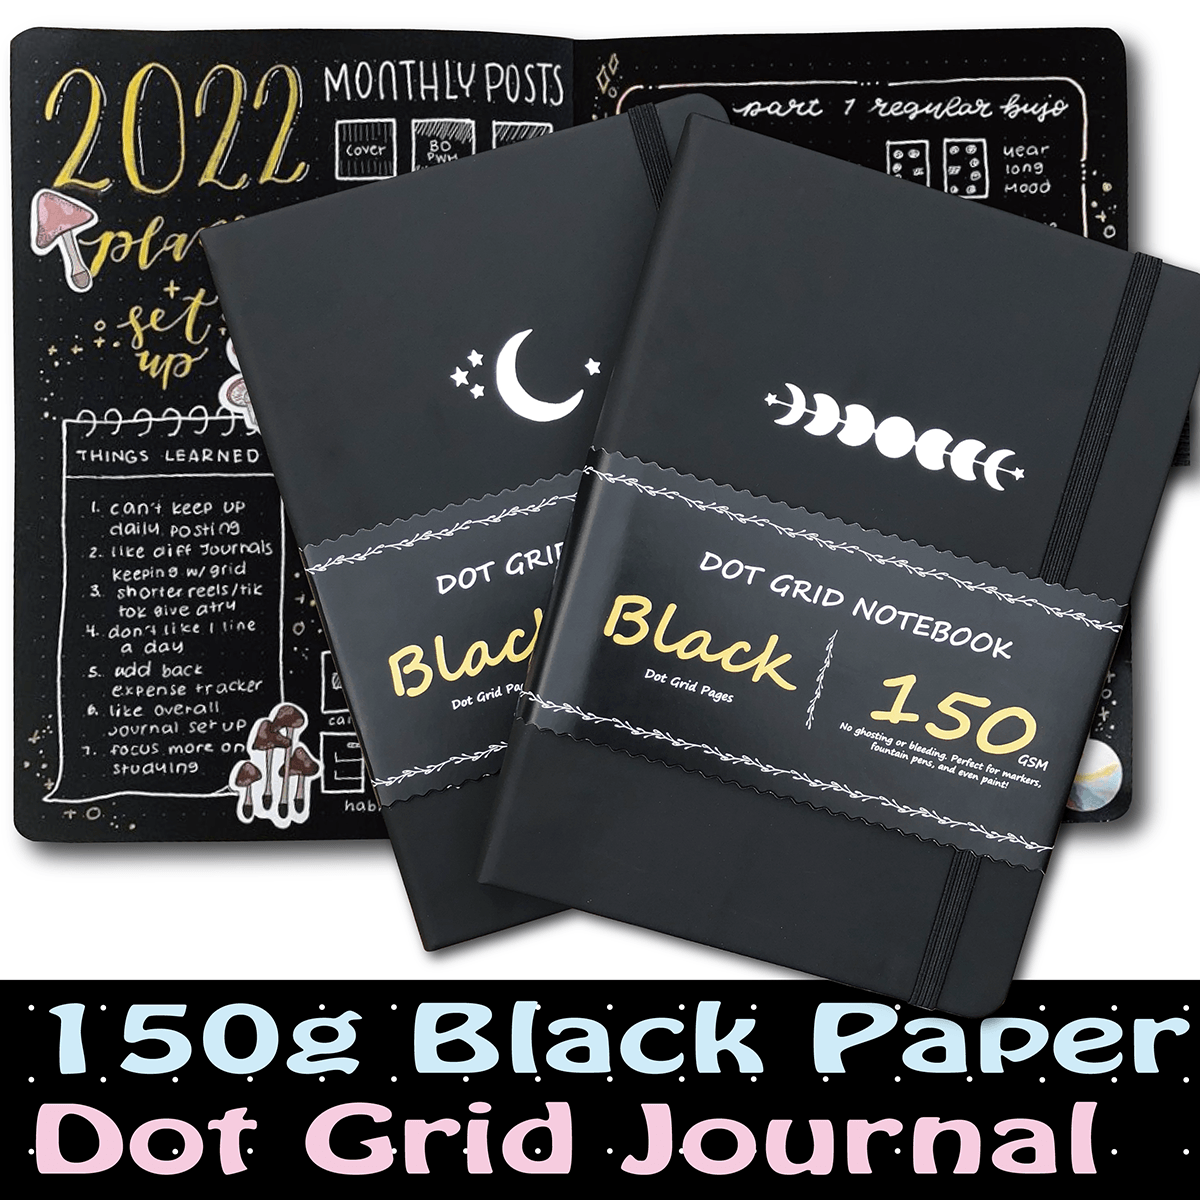 Black Paper Inner Page Creative Blank Black Card Diary Notebook